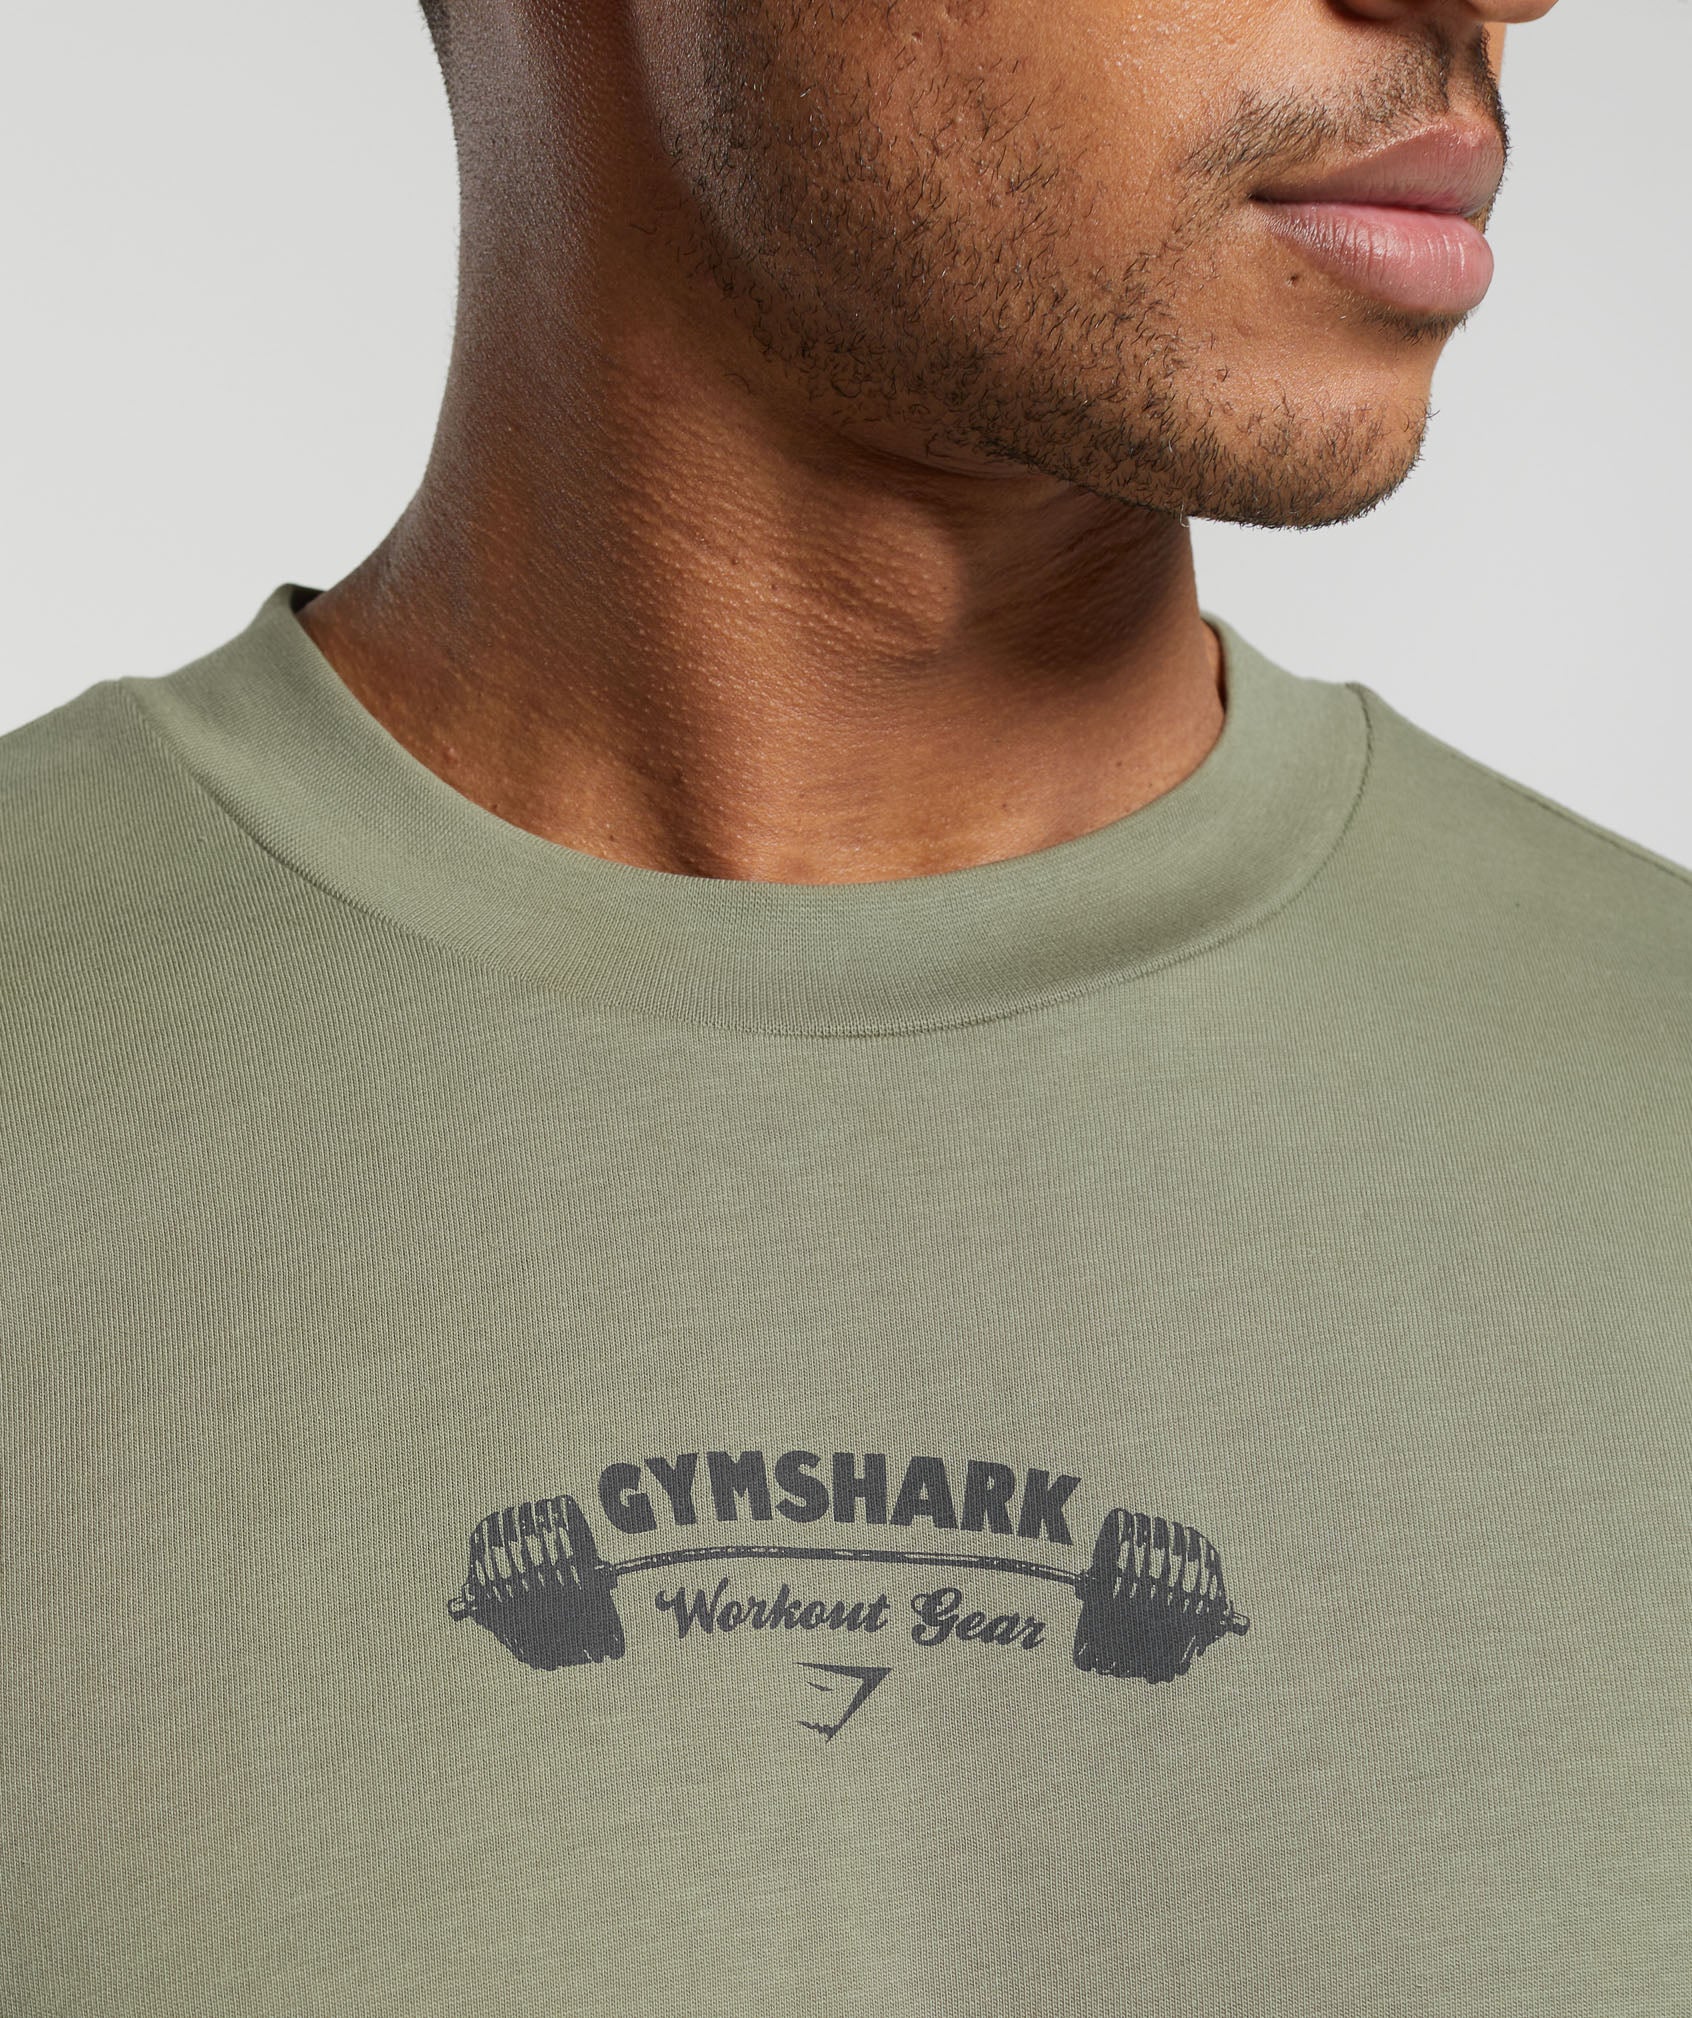 Workout Gear T-Shirt in Utility Green - view 5